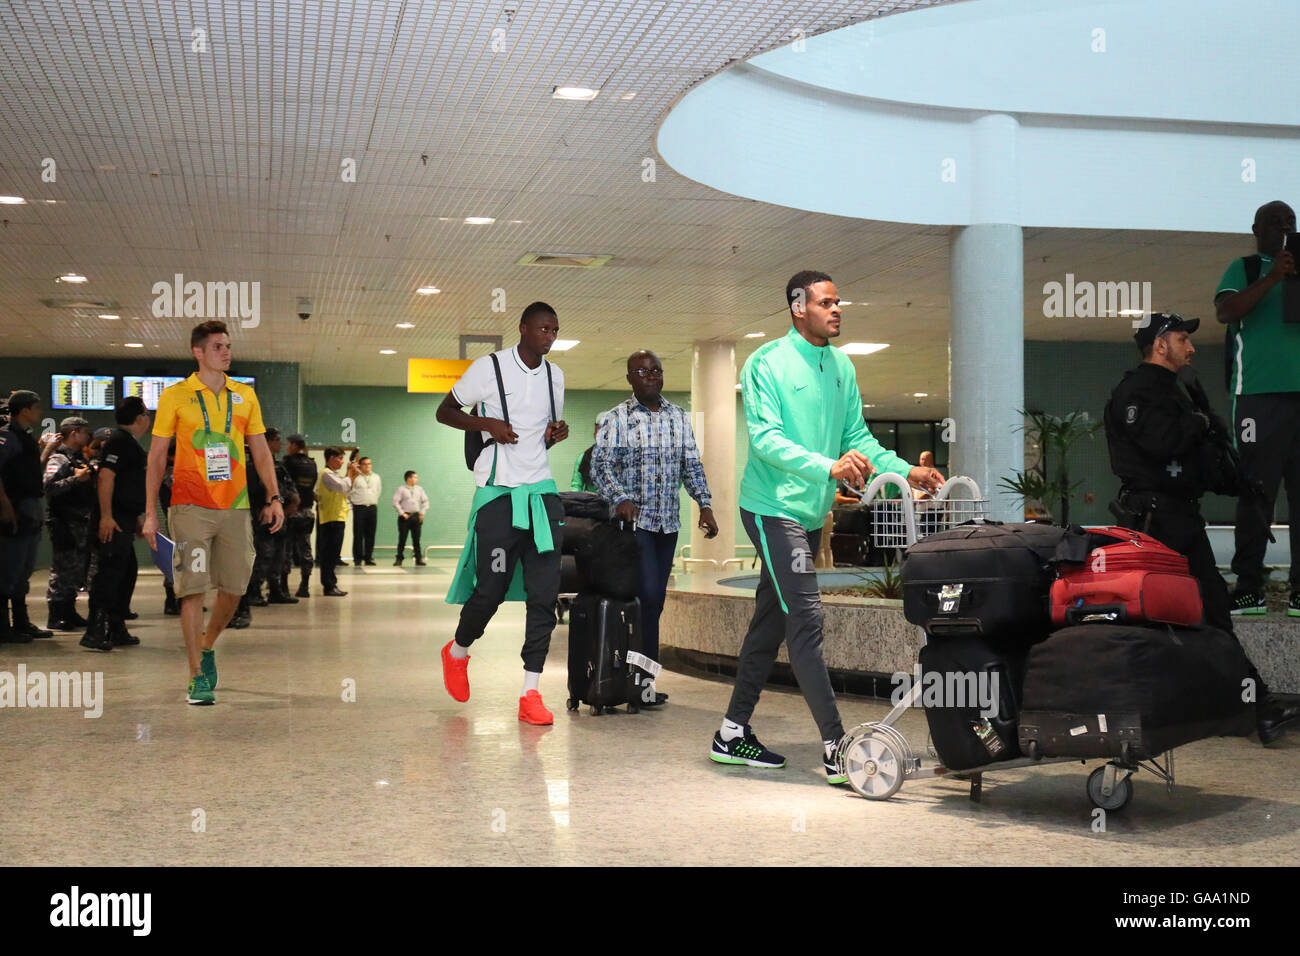 Manaus, Brazil. 4th Aug, 2016. Nigeria team group (NGR) Football/Soccer : Nigeria team arrived at the airport during the Rio 2016 Olympic Games in Manaus, Brazil . © YUTAKA/AFLO SPORT/Alamy Live News Stock Photo